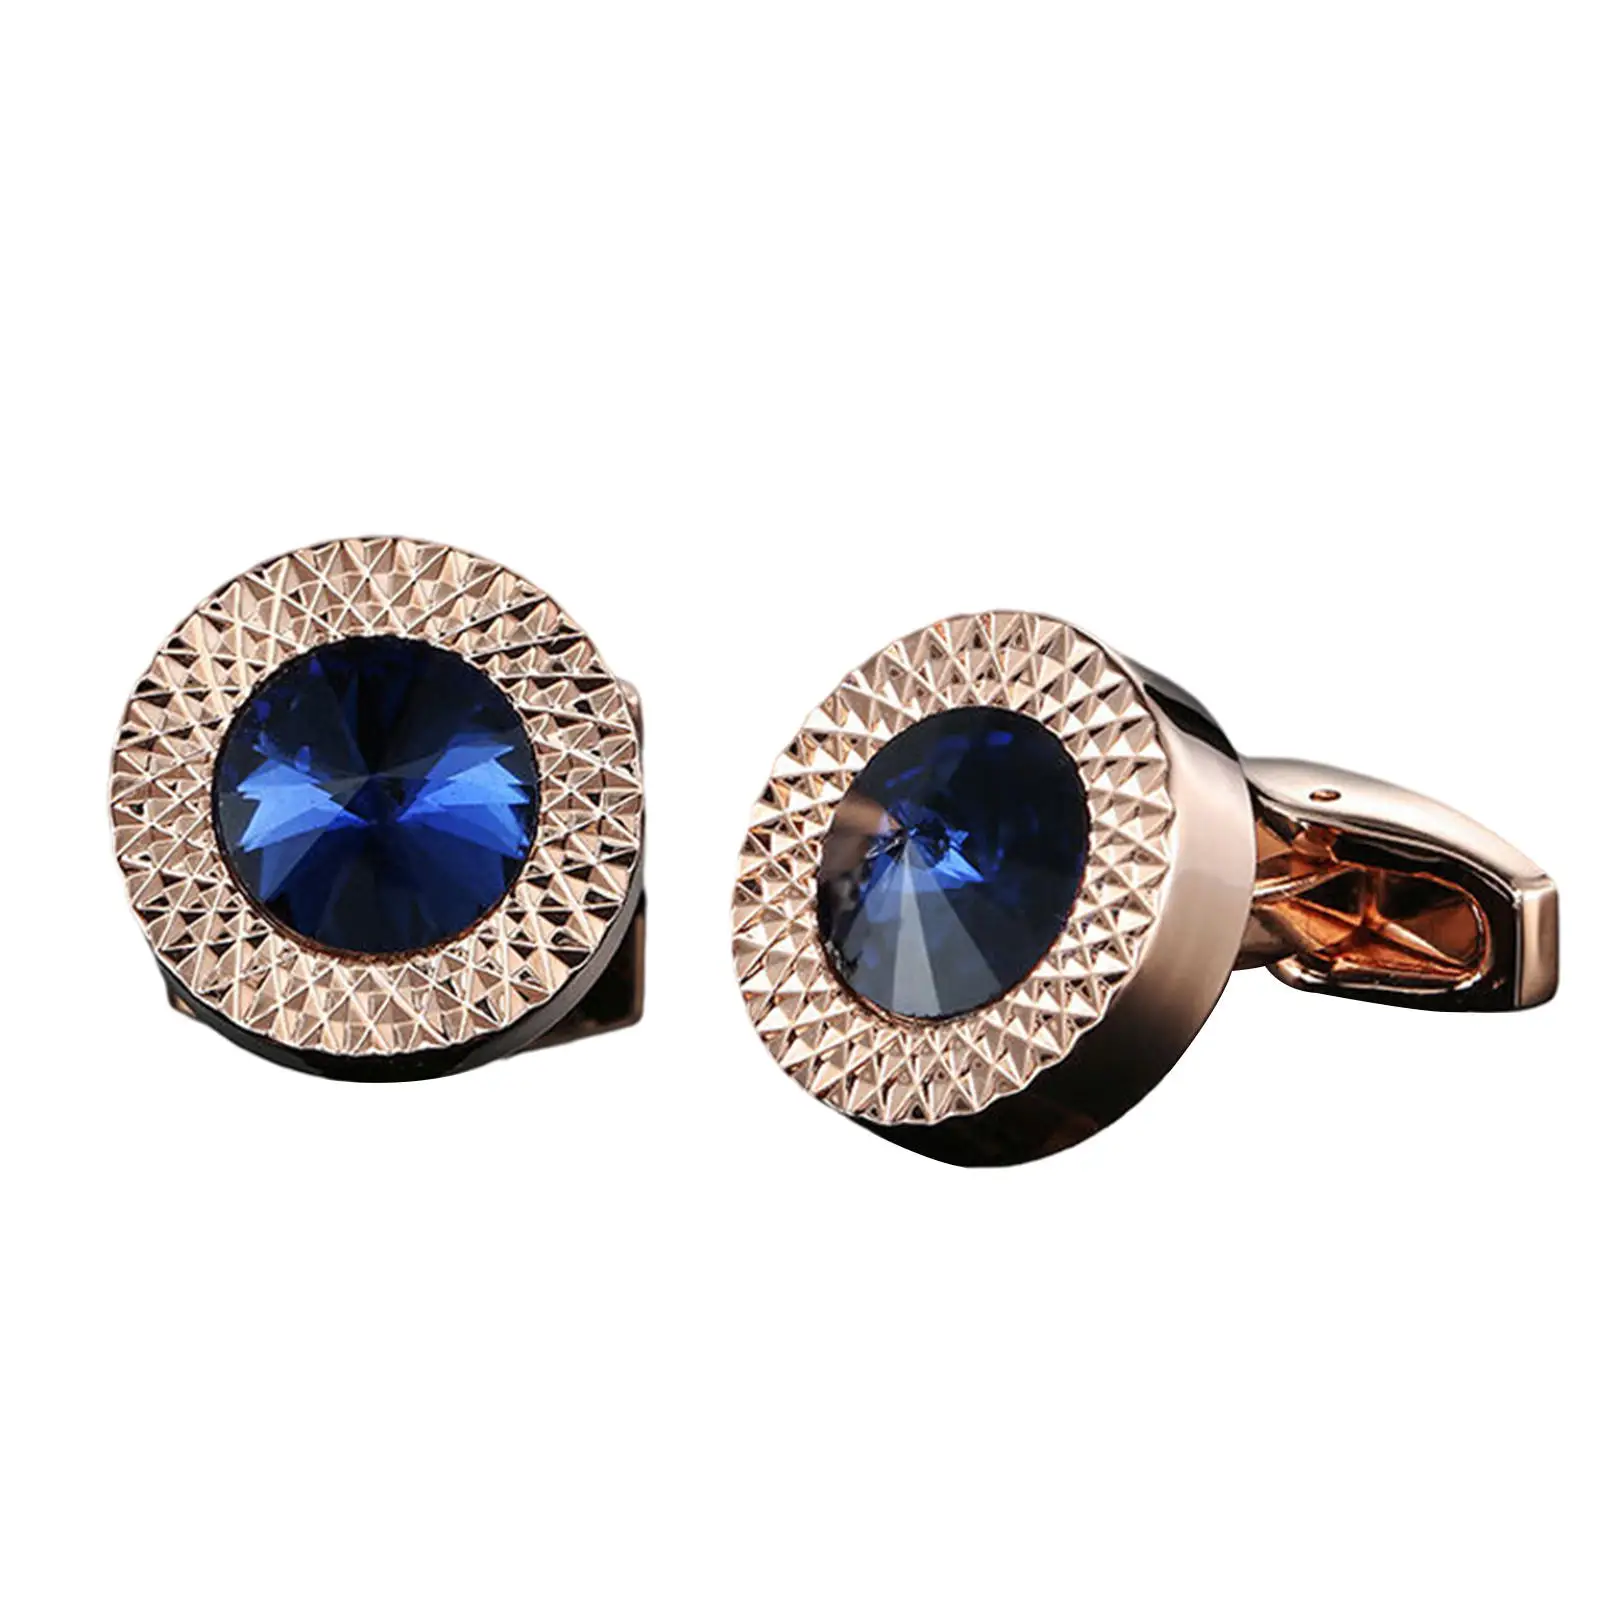 Mens Round Copper Crystal Shirts Cufflinks , Applies to Any Occasion Business Wedding Present for Families and Friends Shiny